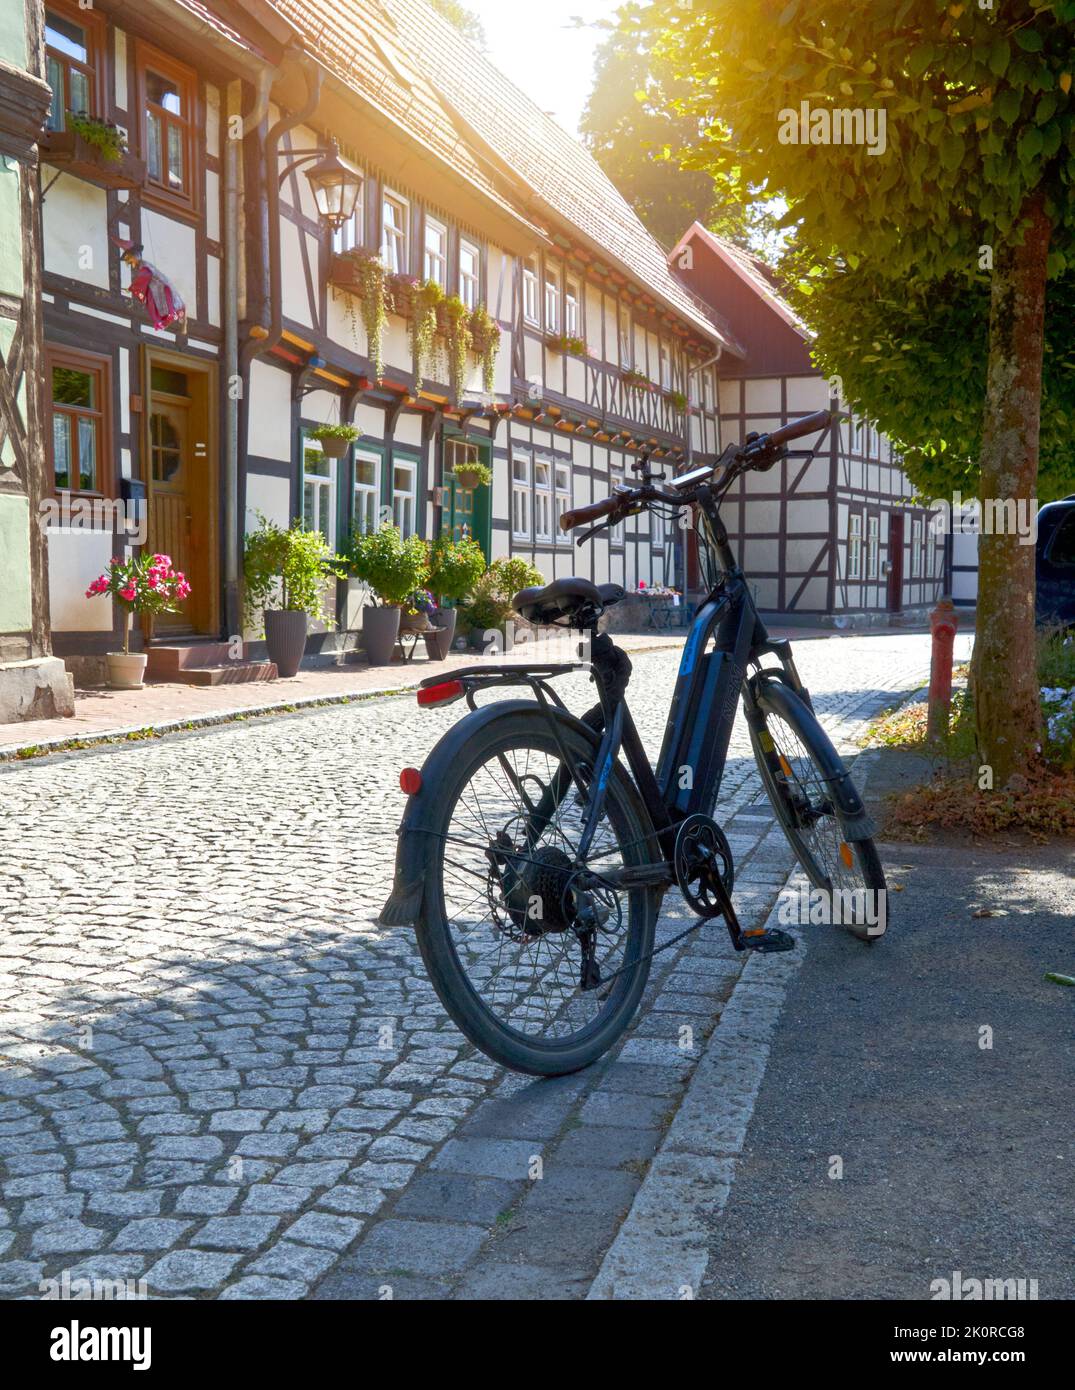 NCM bike parked in front of historic half-timbered houses in an alley during a bike tour through the Harz mountains in Stolberg, Germany, September 4, Stock Photo